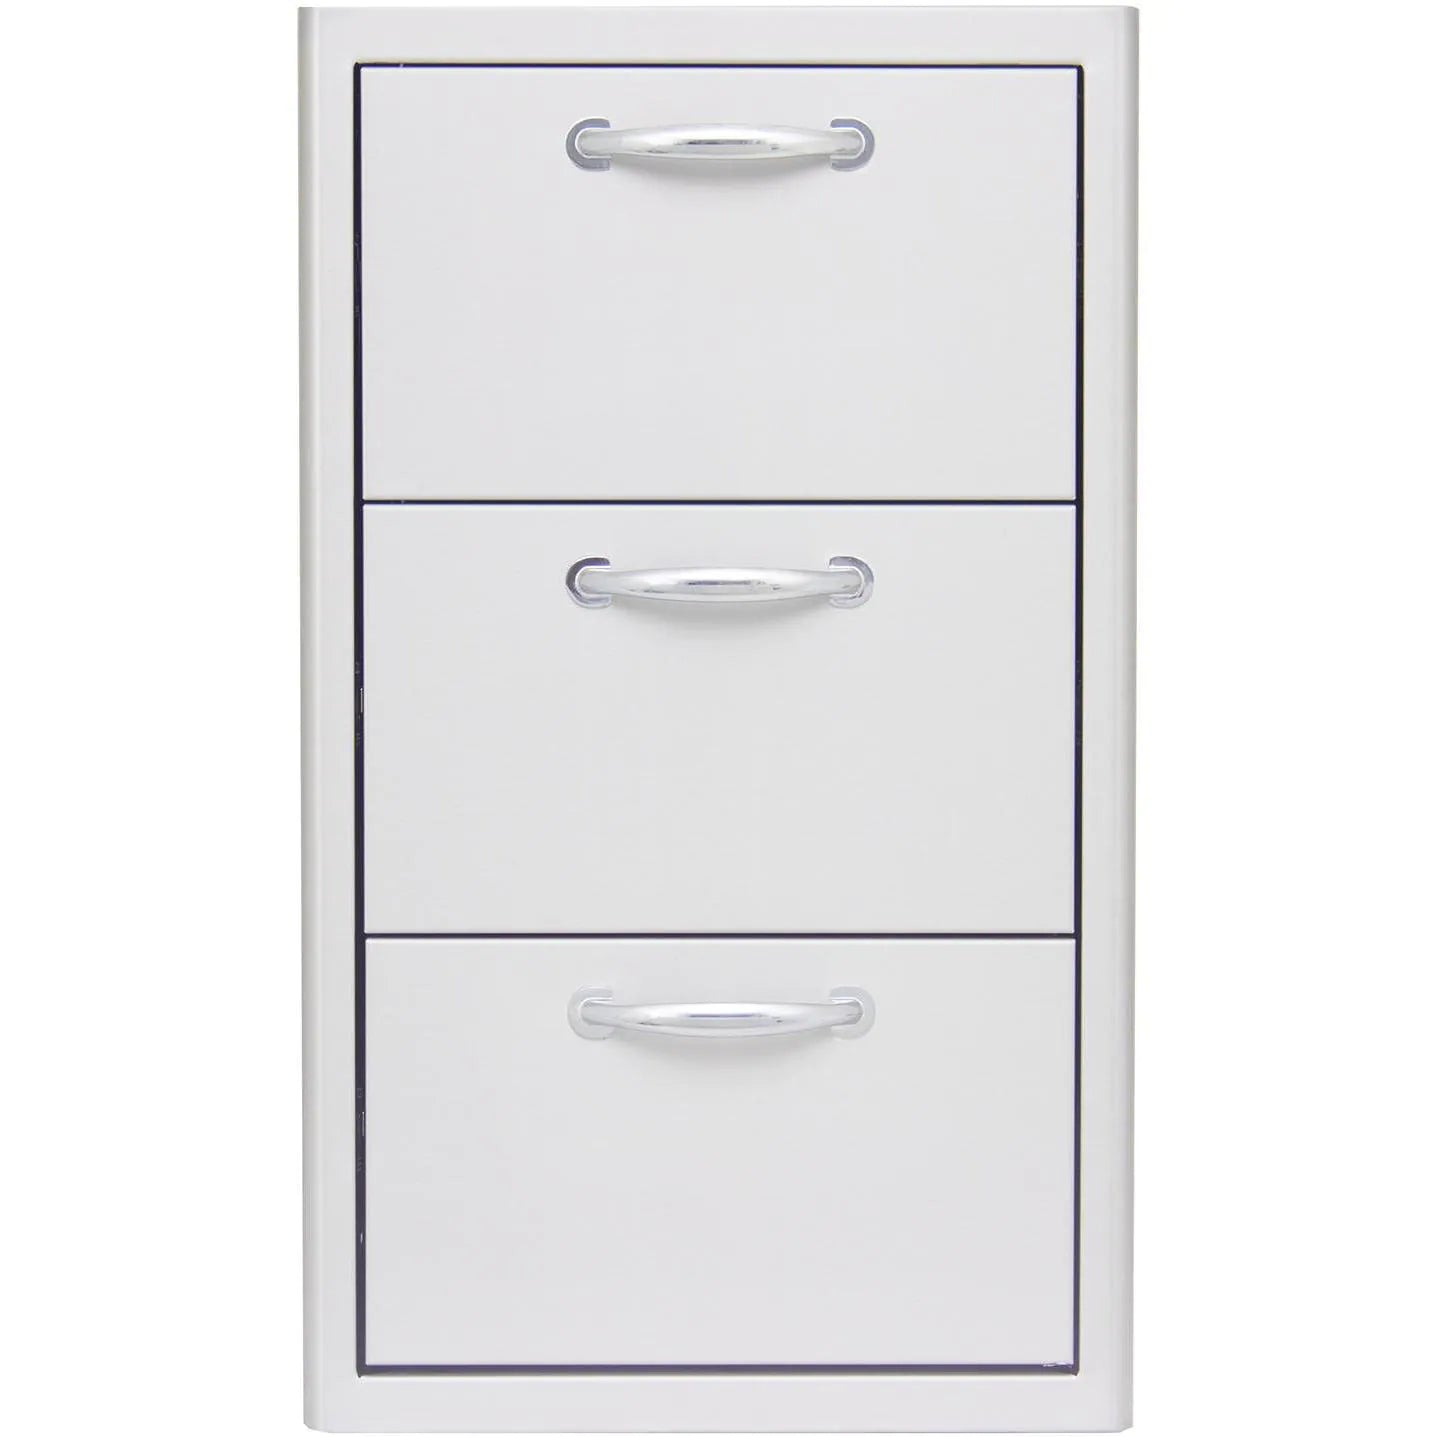 Blaze 16 Inch Triple Access Drawer Front View